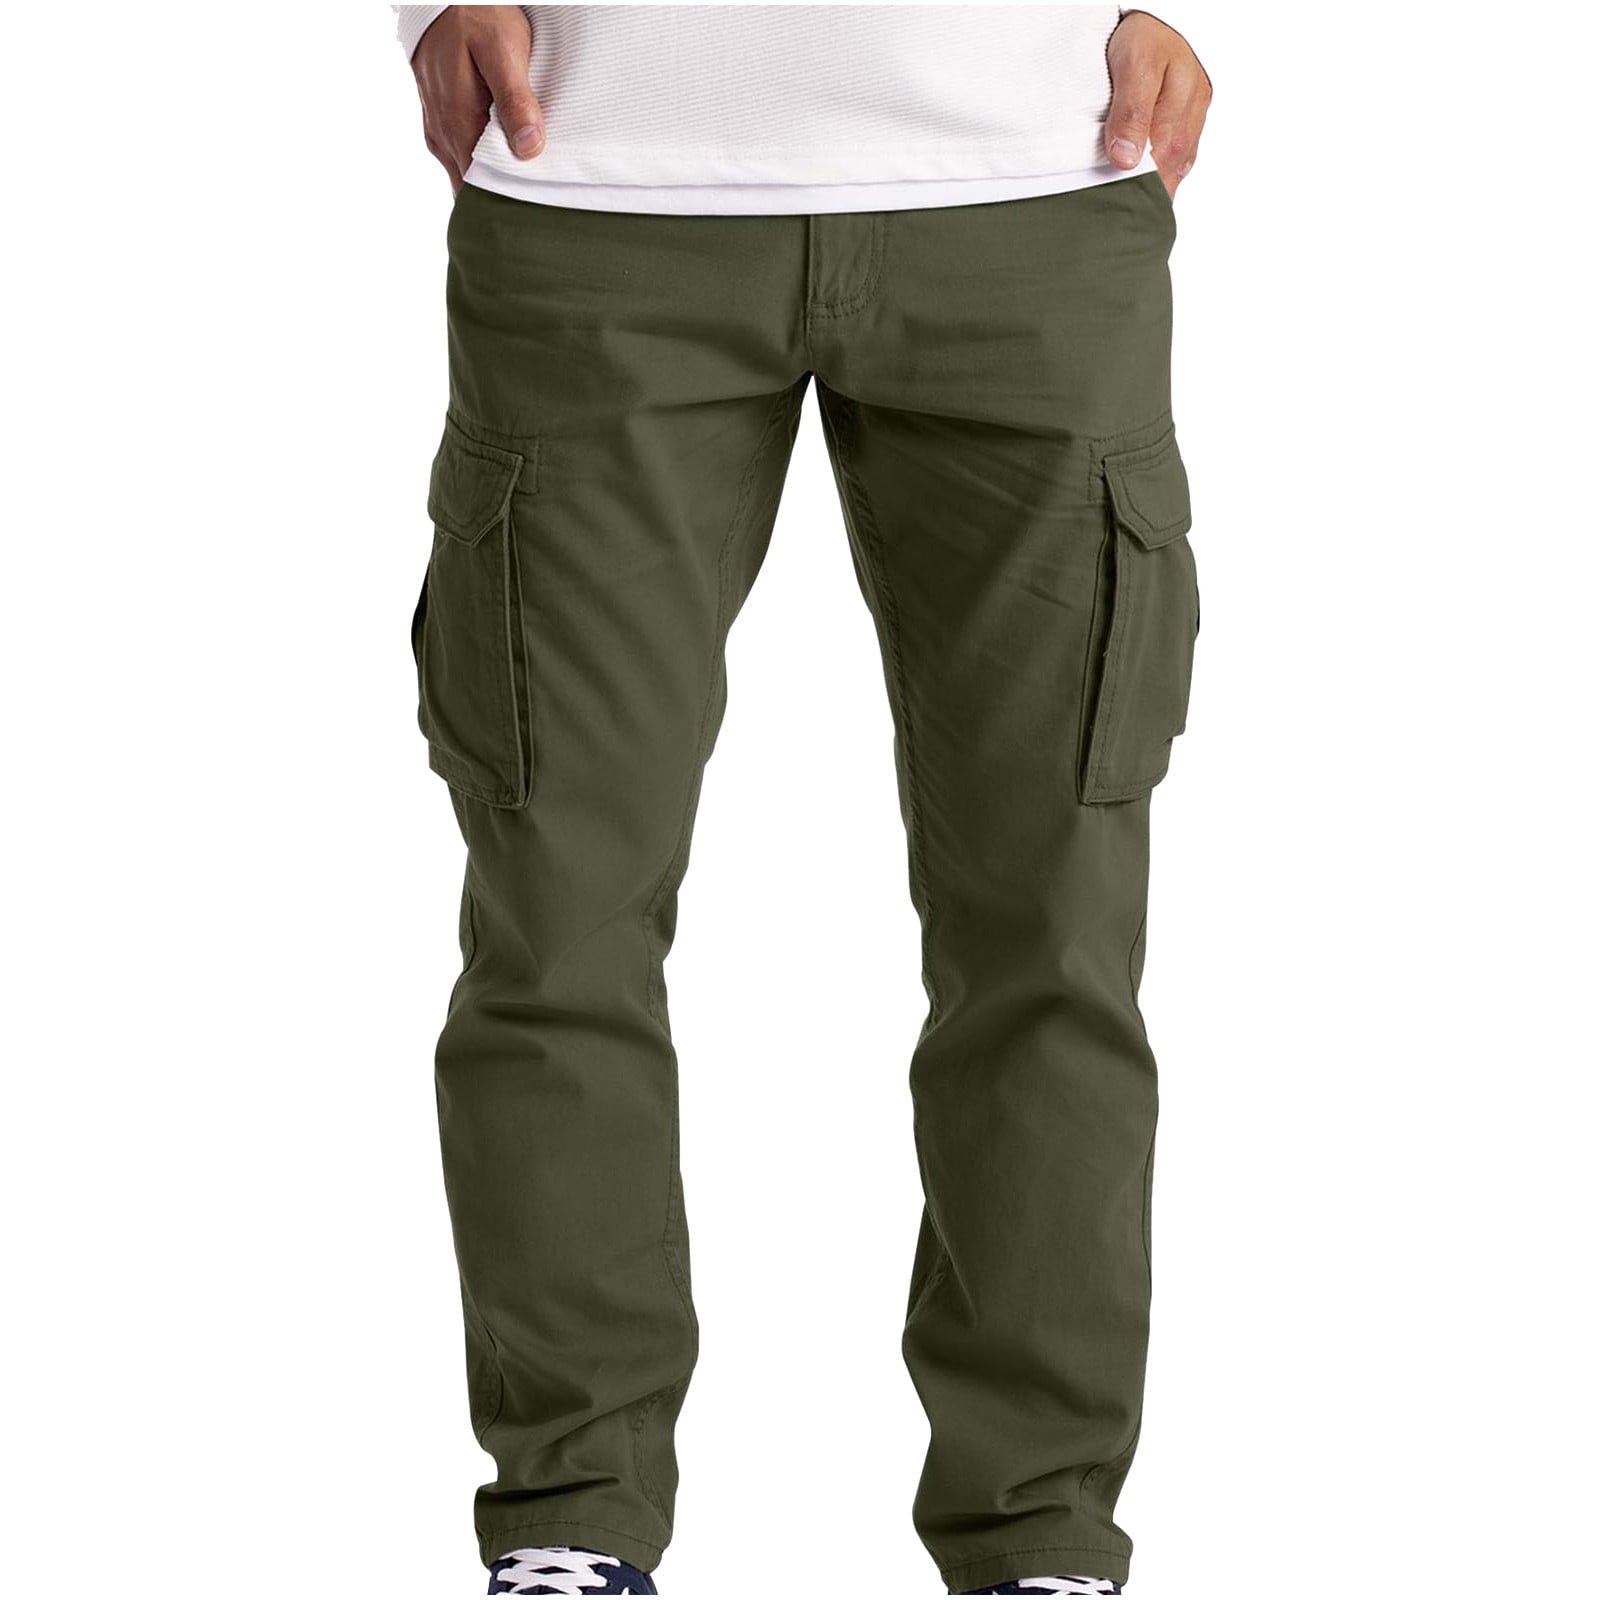 5.11 Tactical Men's Taclite Pro Lightweight Performance Pants, Cargo  Pockets, Action Waistband, Style 74274 : Clothing, Shoes & Jewelry -  Amazon.com